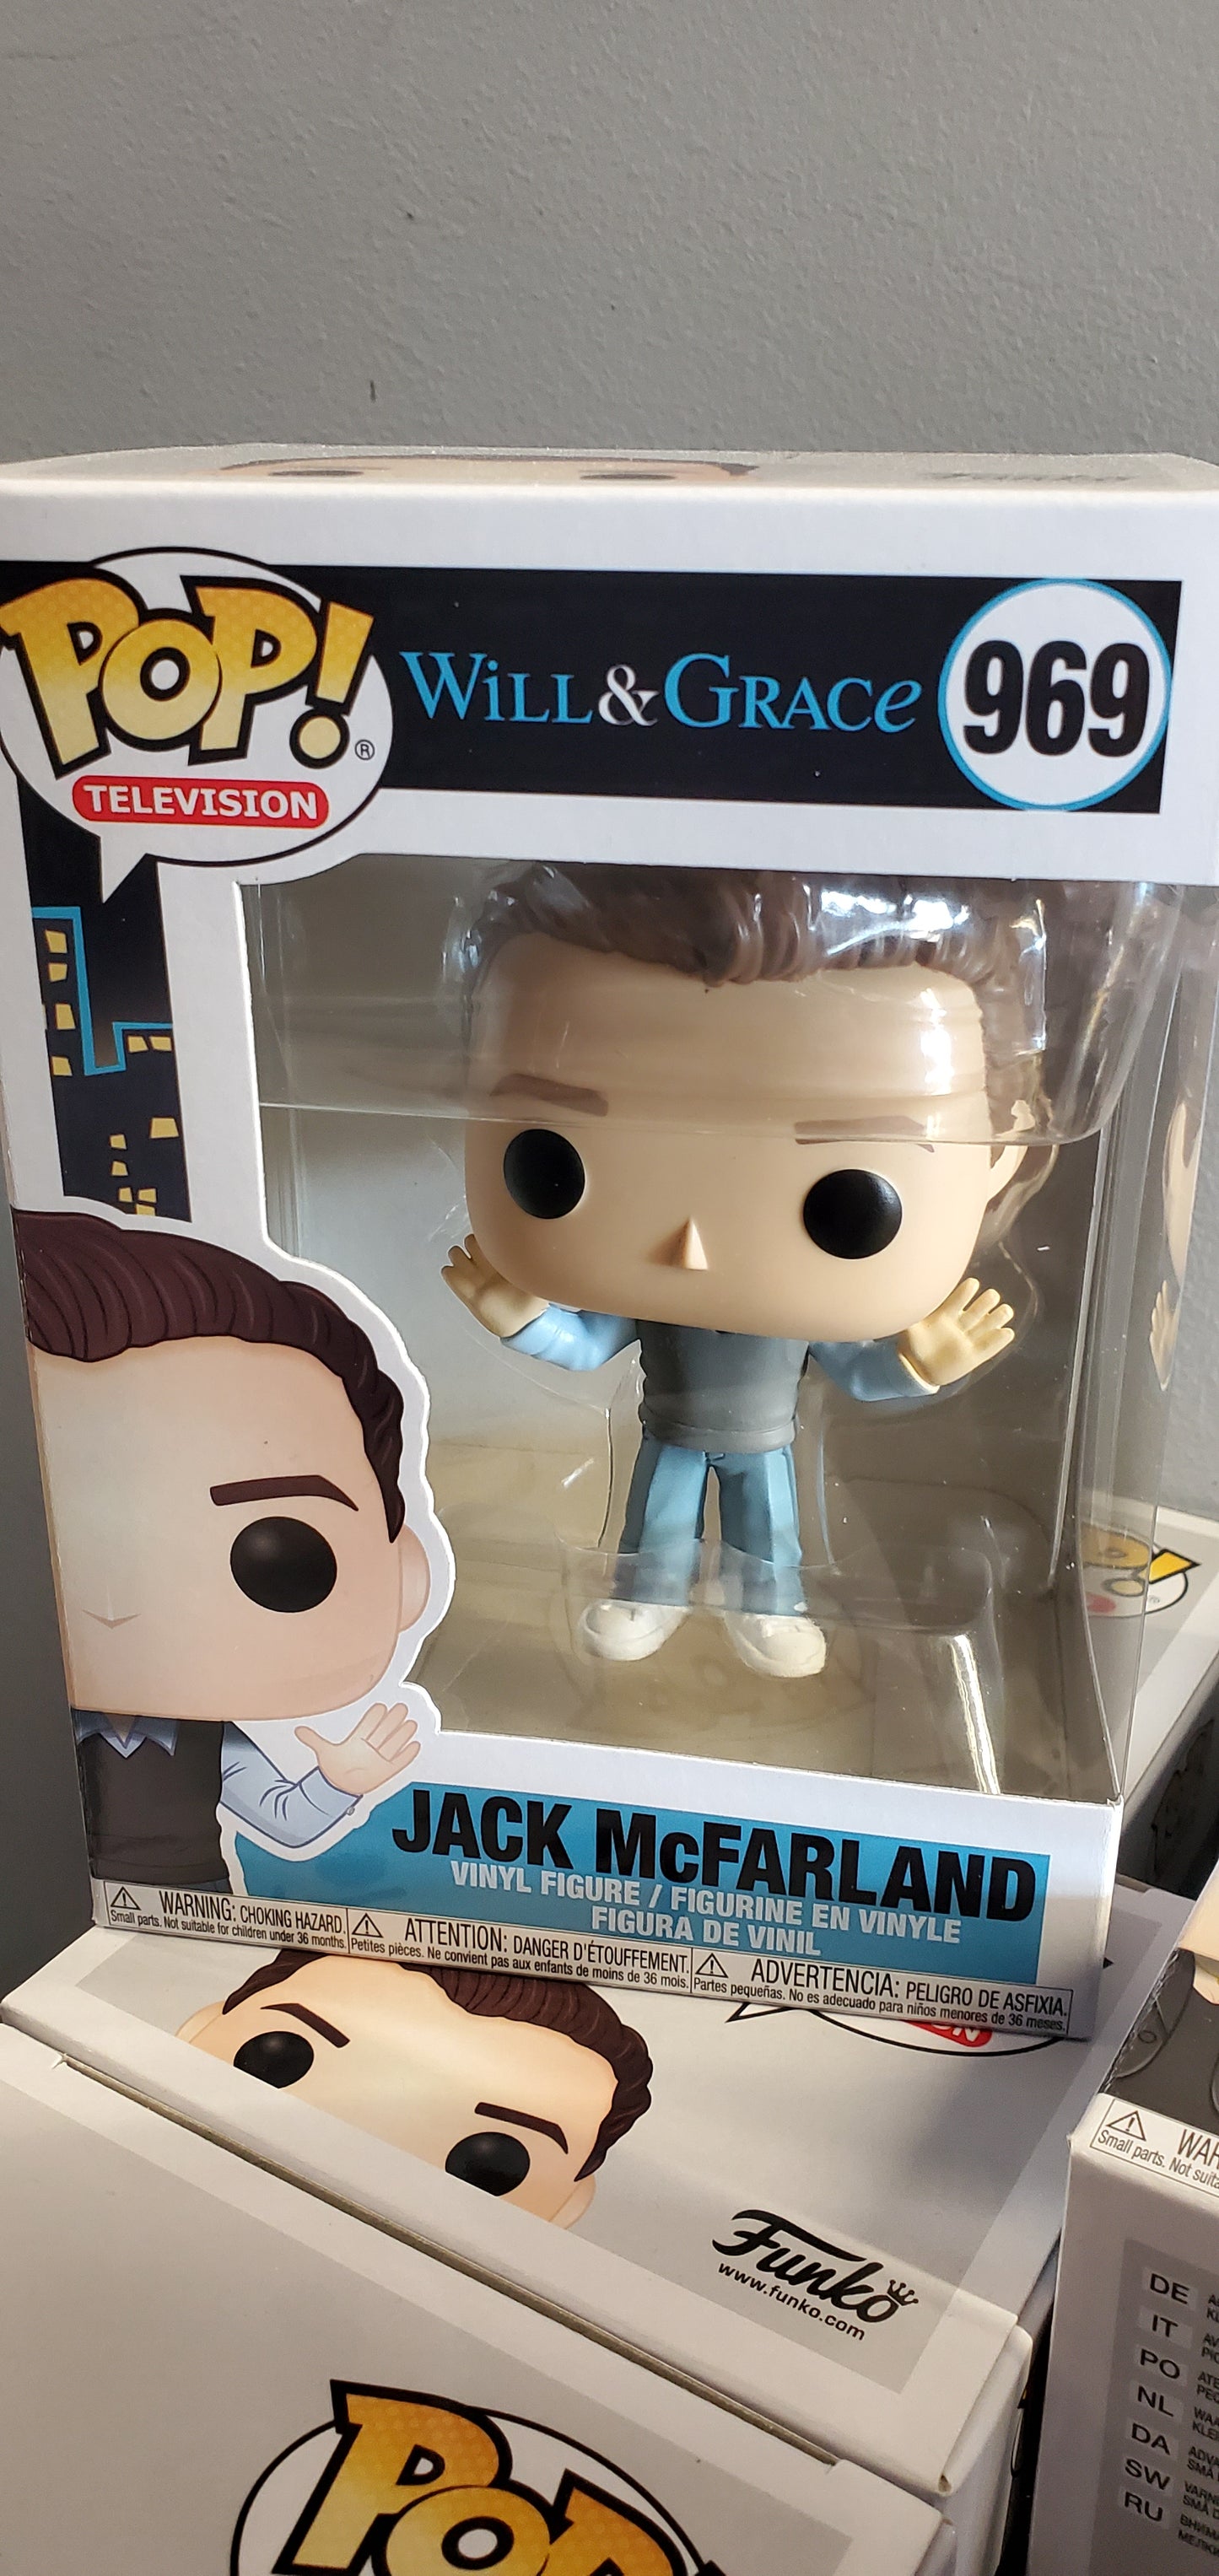 Will and Grace - Jack McFarland Funko Pop! Vinyl Figure television